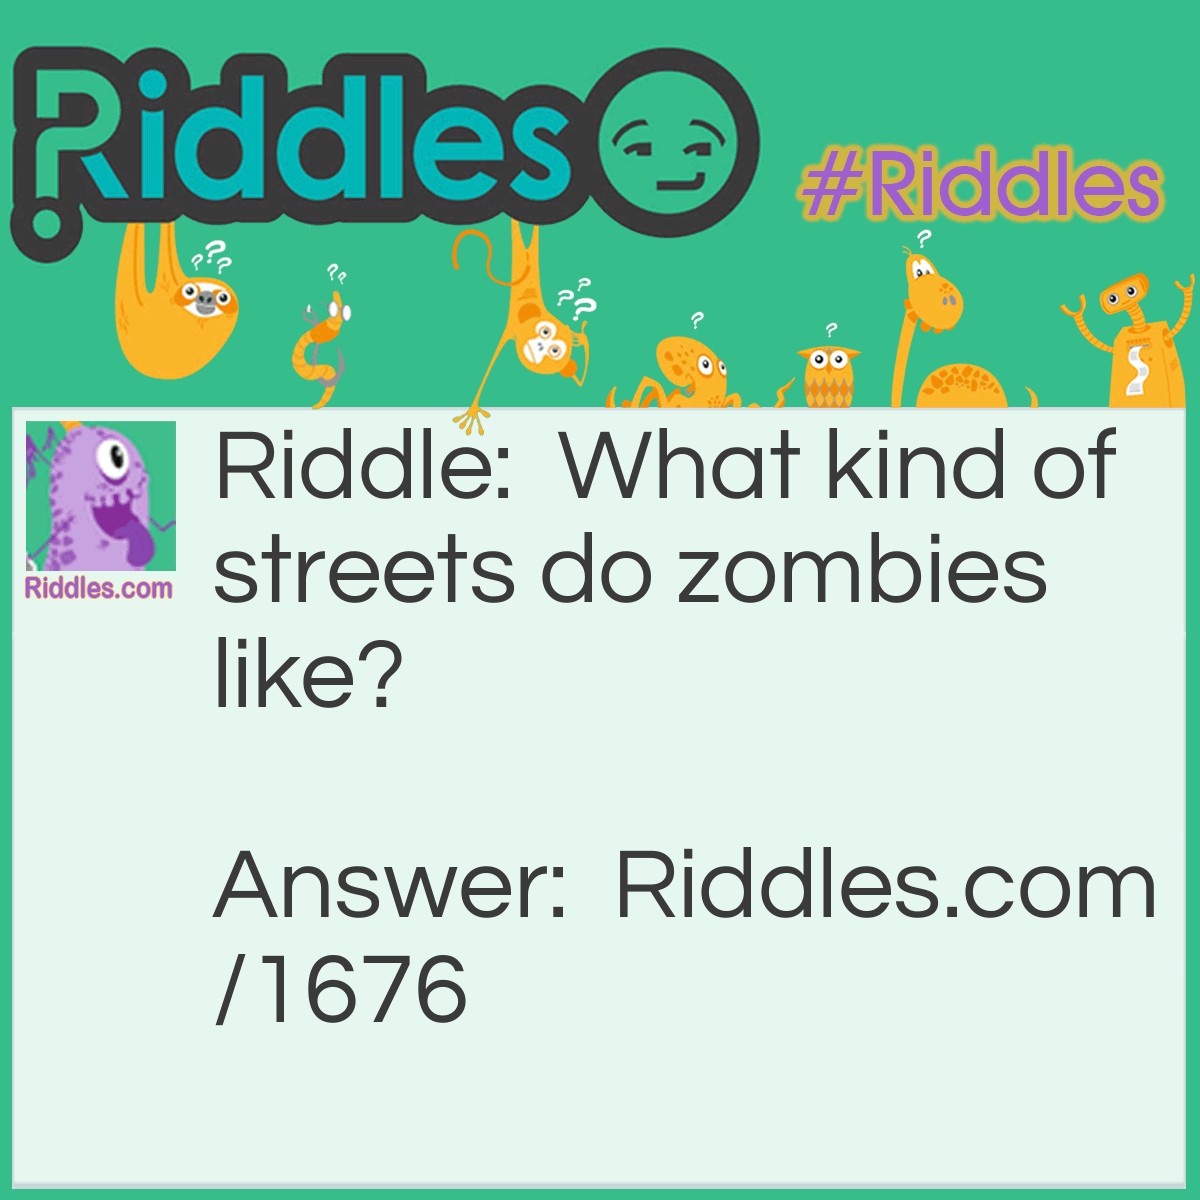 Riddle: What kind of streets do zombies like? Answer: Dead ends!